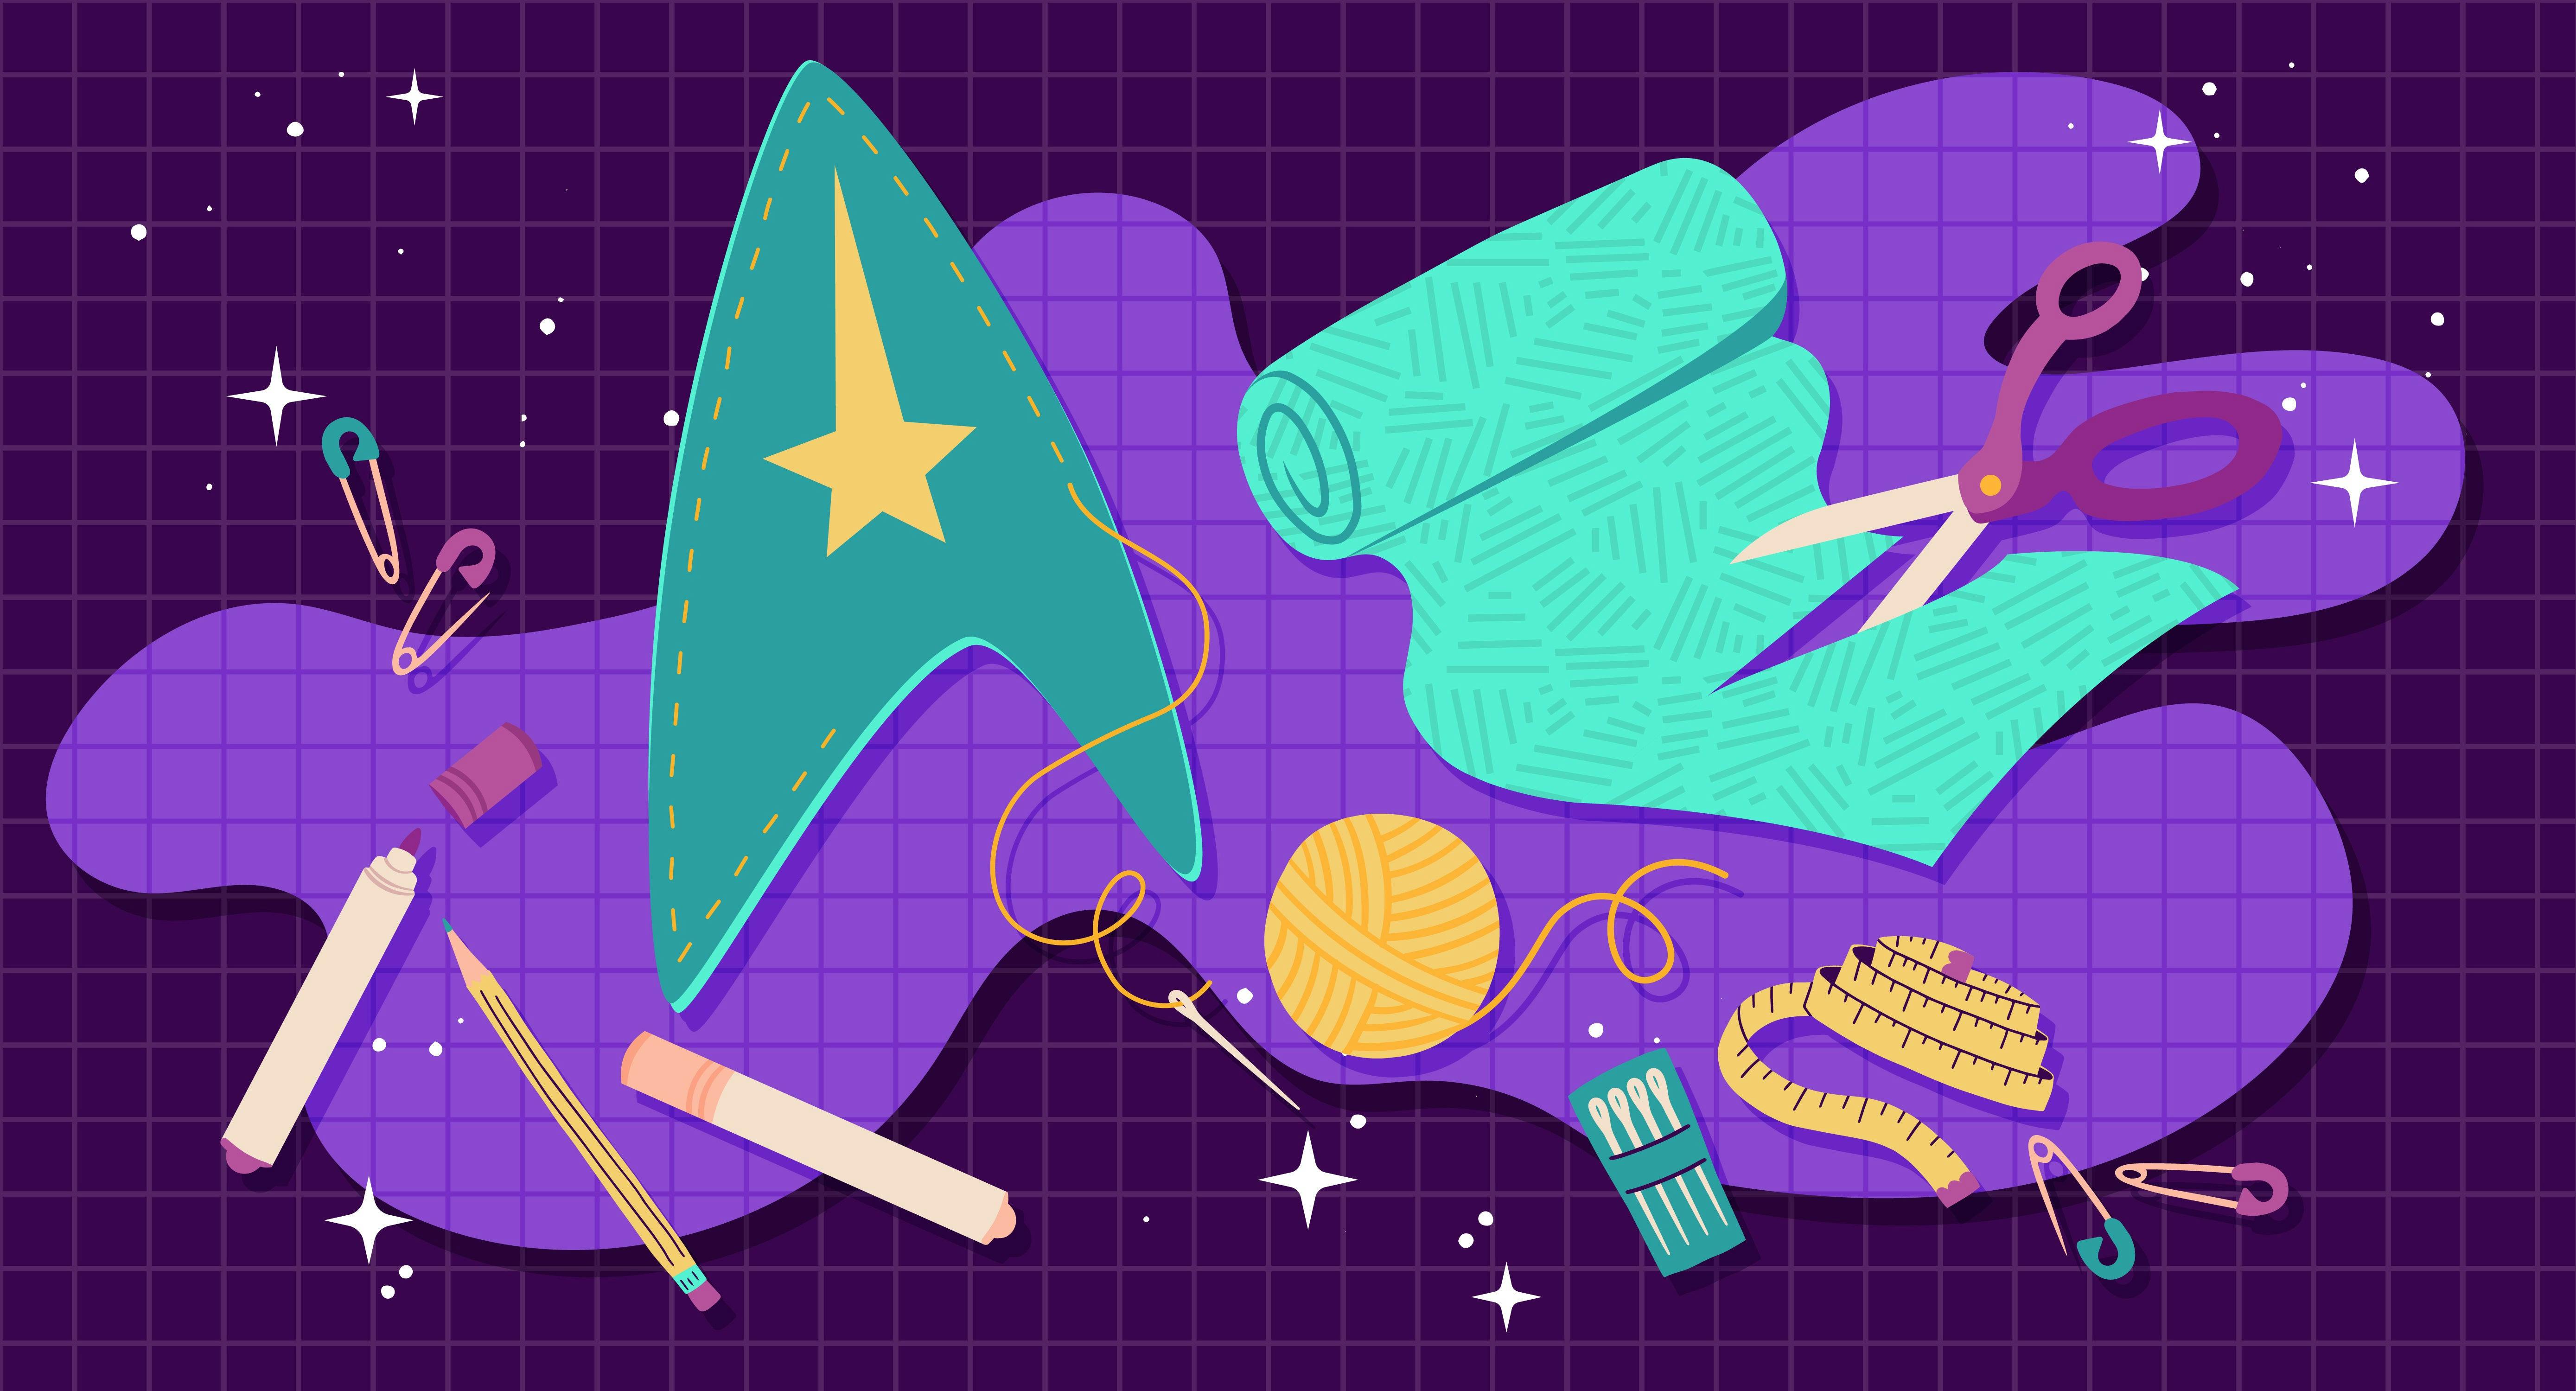 Illustrated banner of the Starfleet insignia with craft materials like thread, scissors, and felt sheets